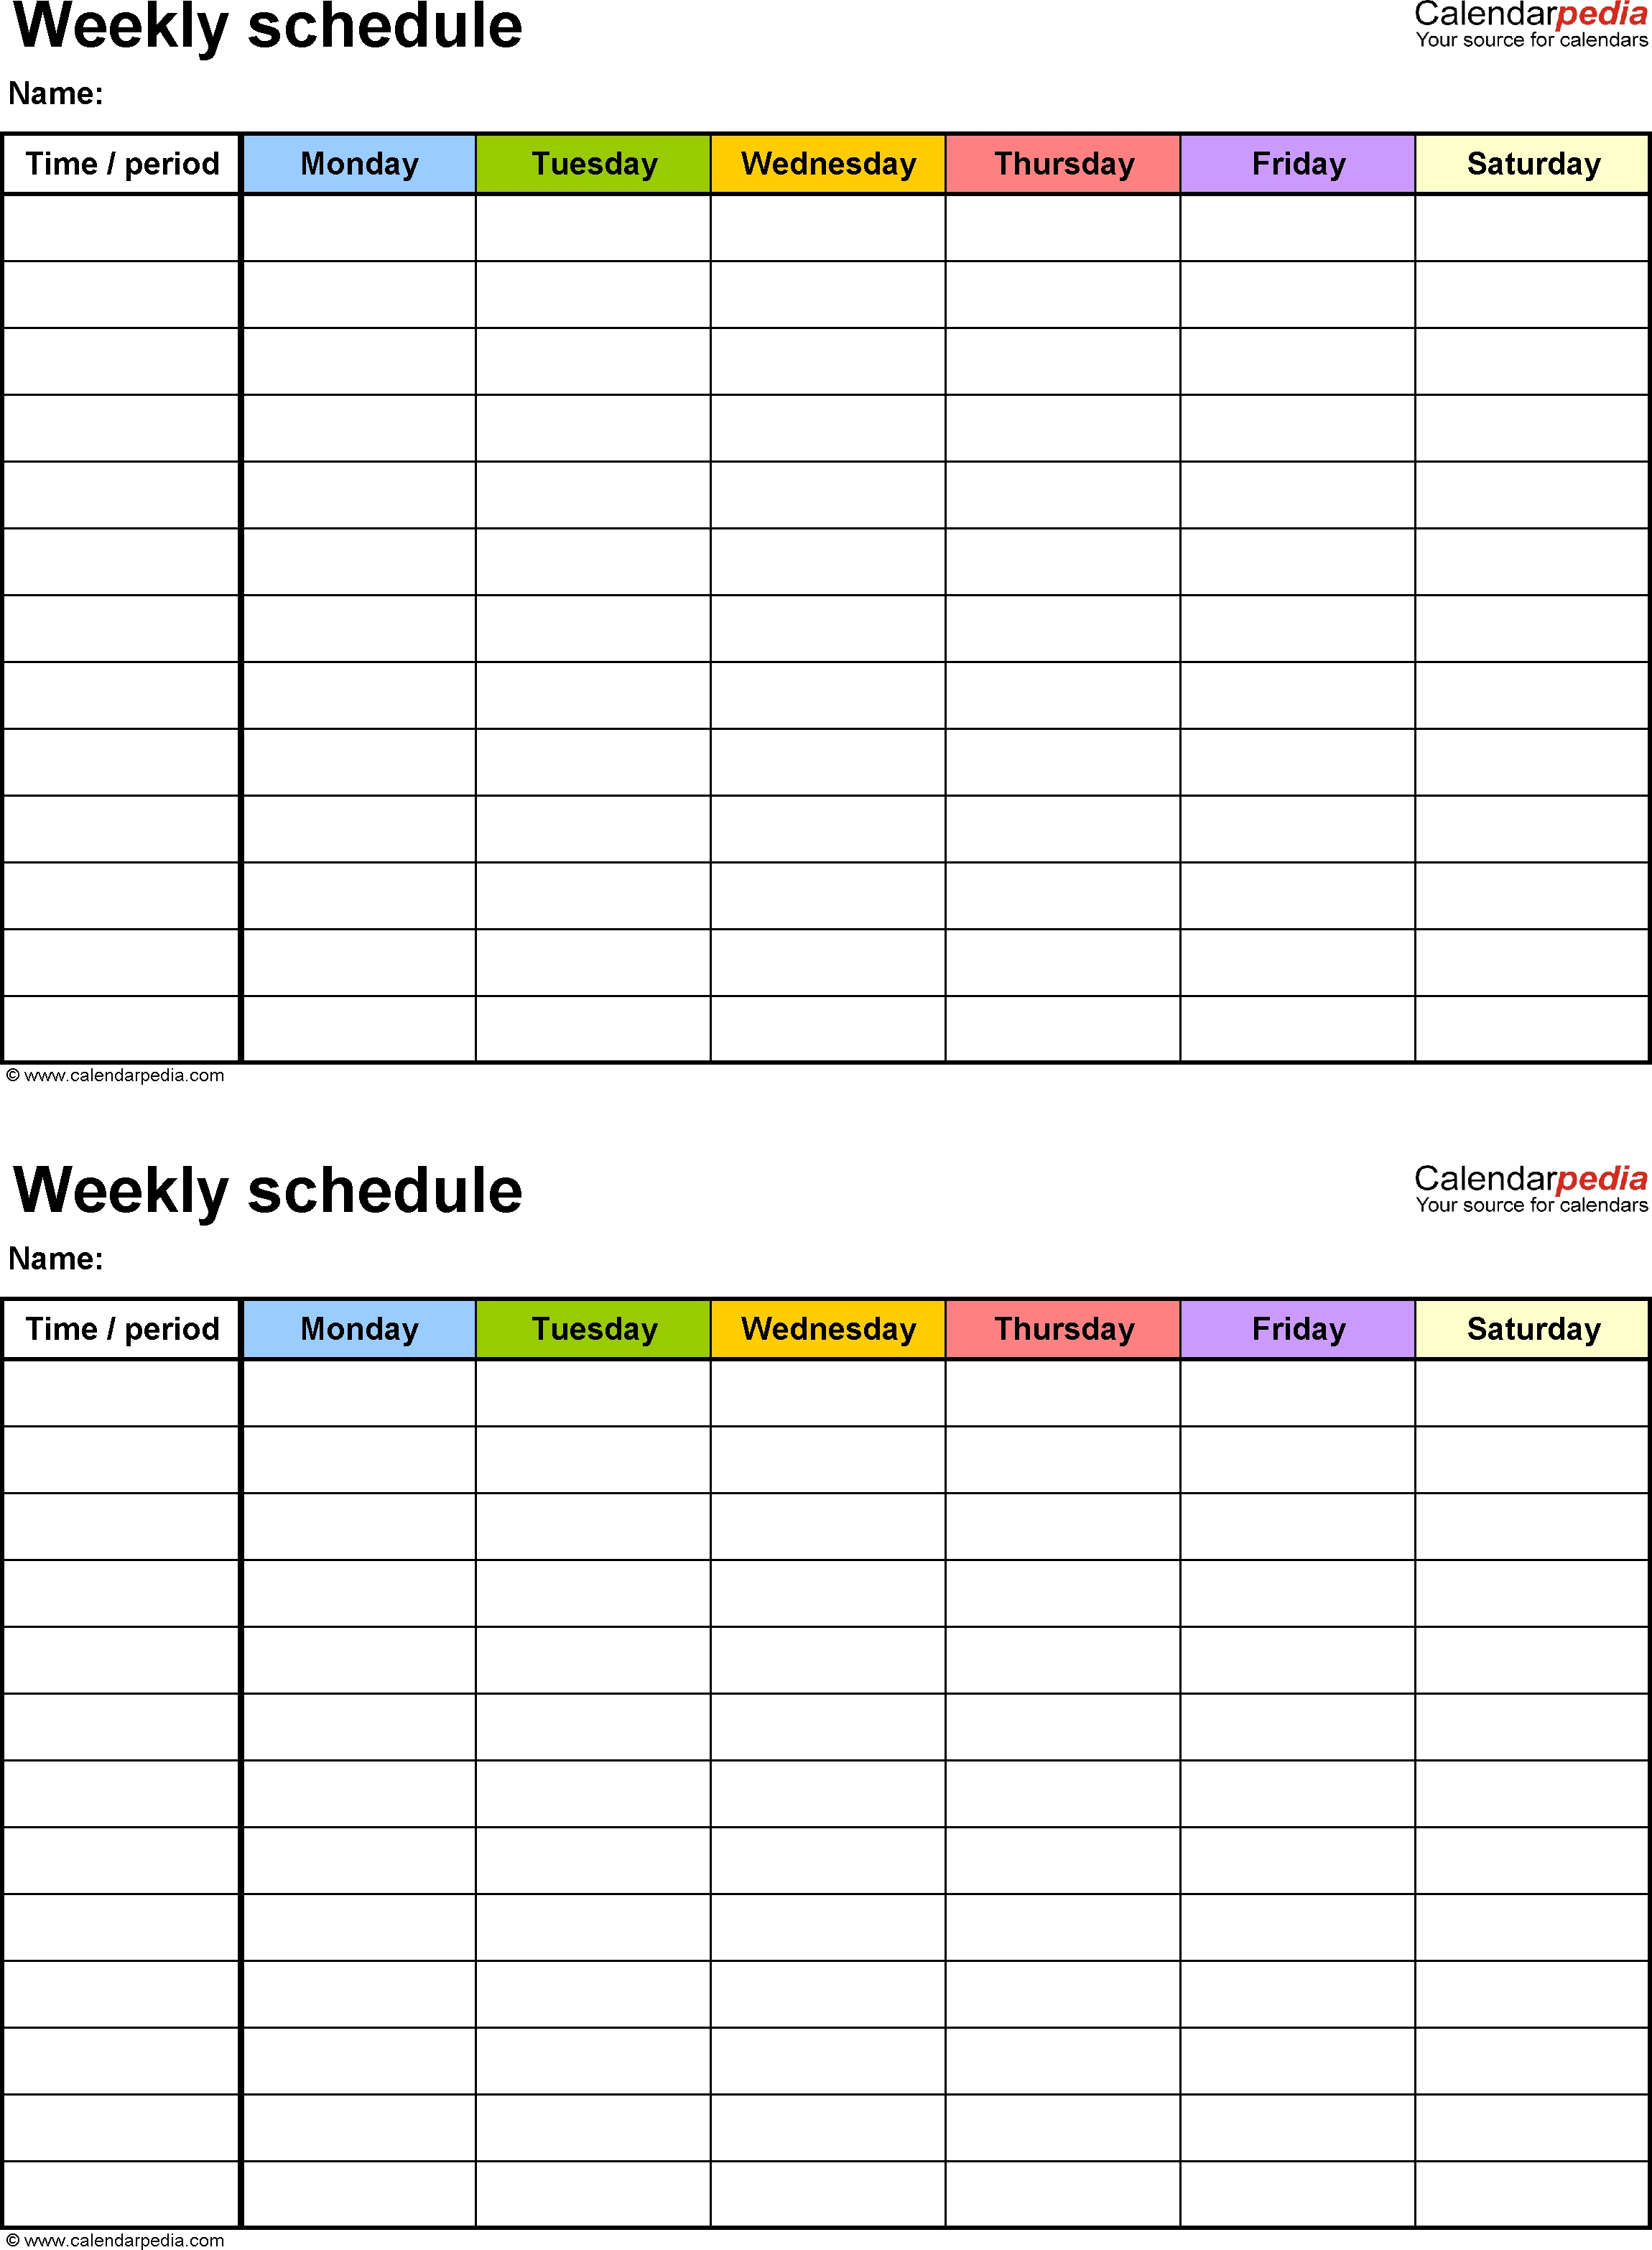 Free Weekly Schedule Templates For Excel - 18 Templates Monthly Calendar Employee Schedule